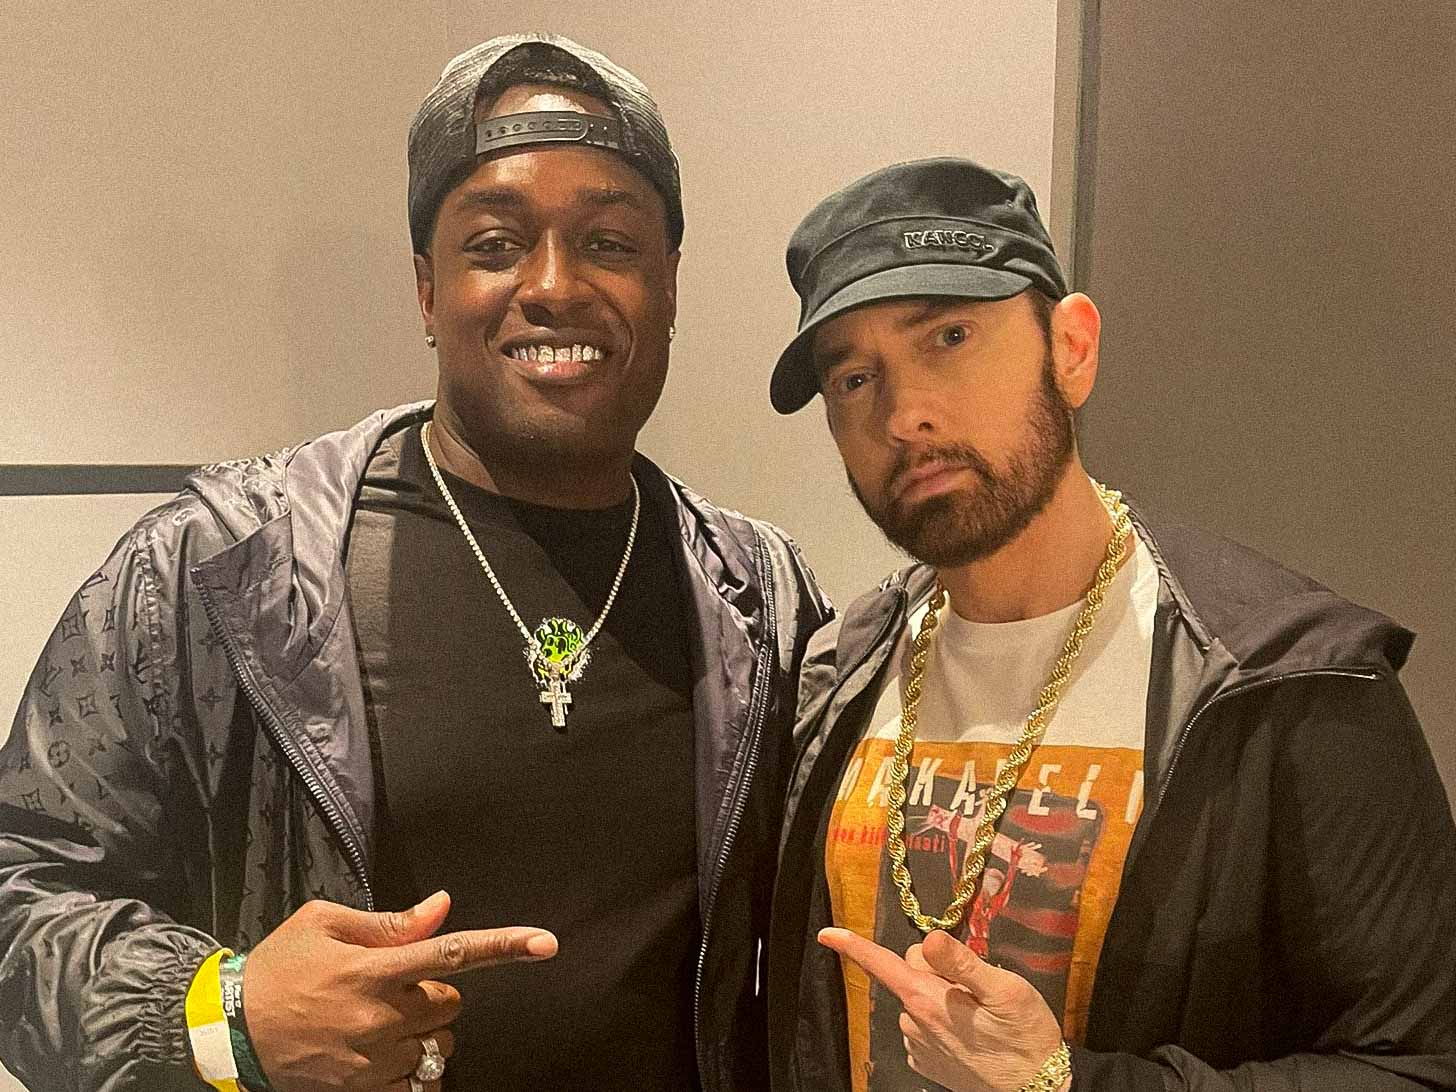 IllaDaProducer standing with rapper and songwriter Eminem at APEFEST in New York, NFT NYC.